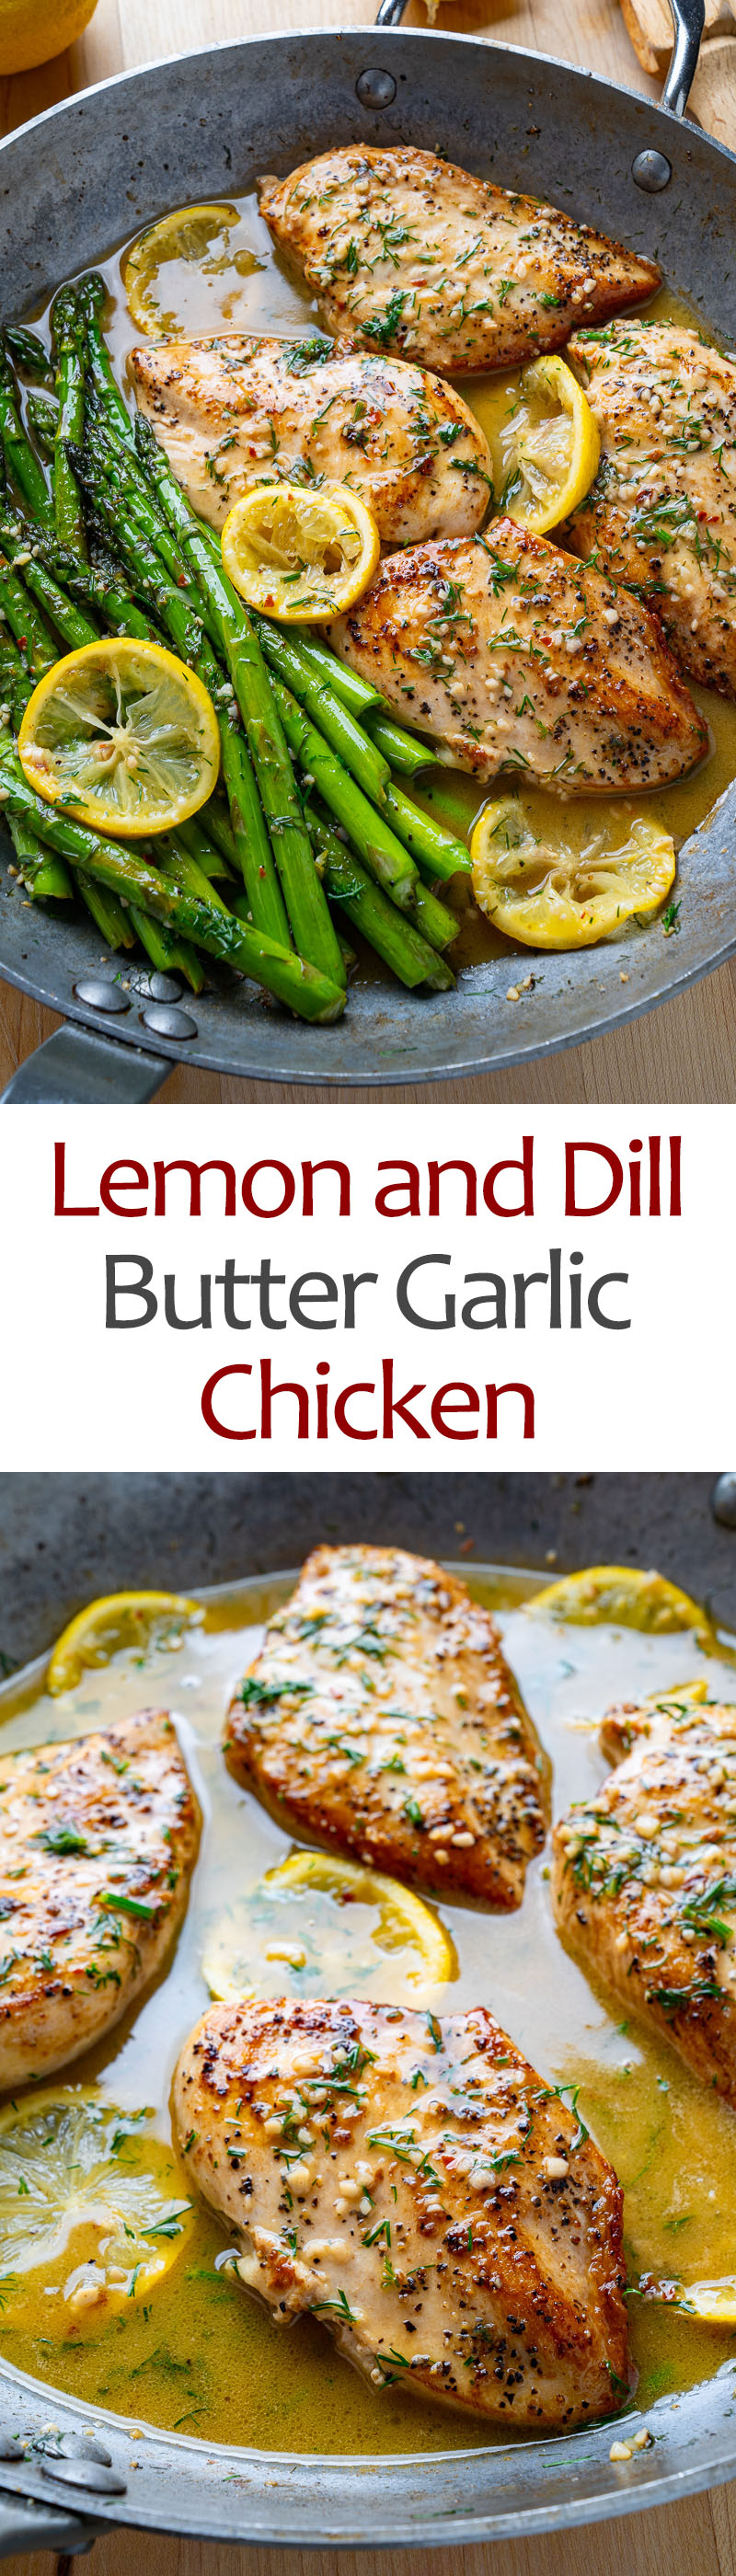 Lemon and Dill Butter Garlic Chicken and Asparagus